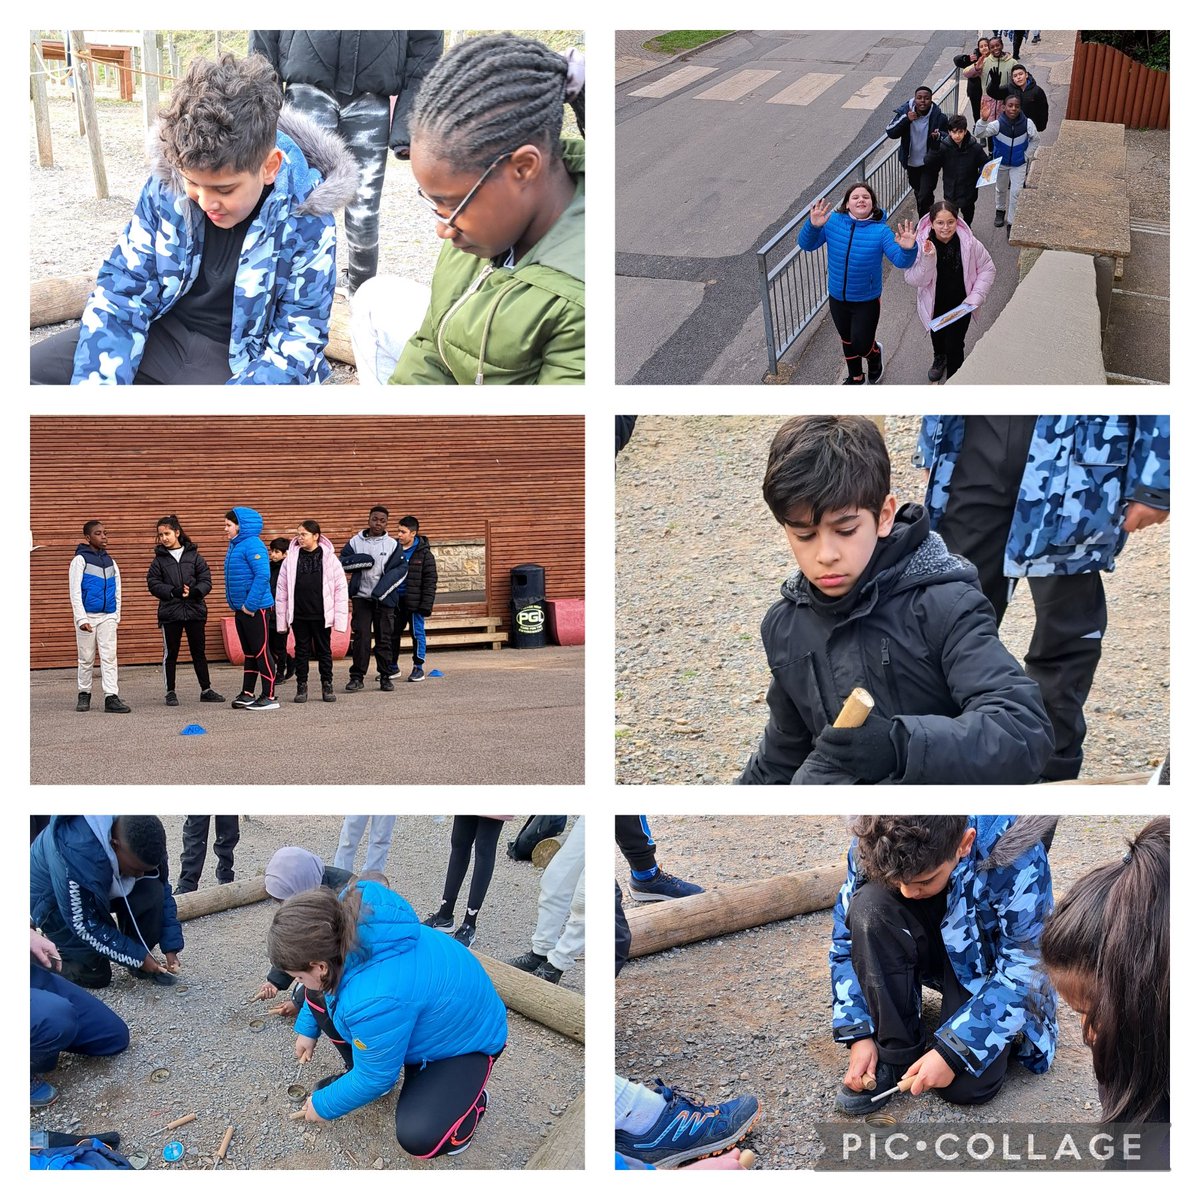 Learning how to make fire in survival @PGLTravel also finding their way home during orienteering activity. Team work makes the dream work @woodberrydownN4 the children have been amazing